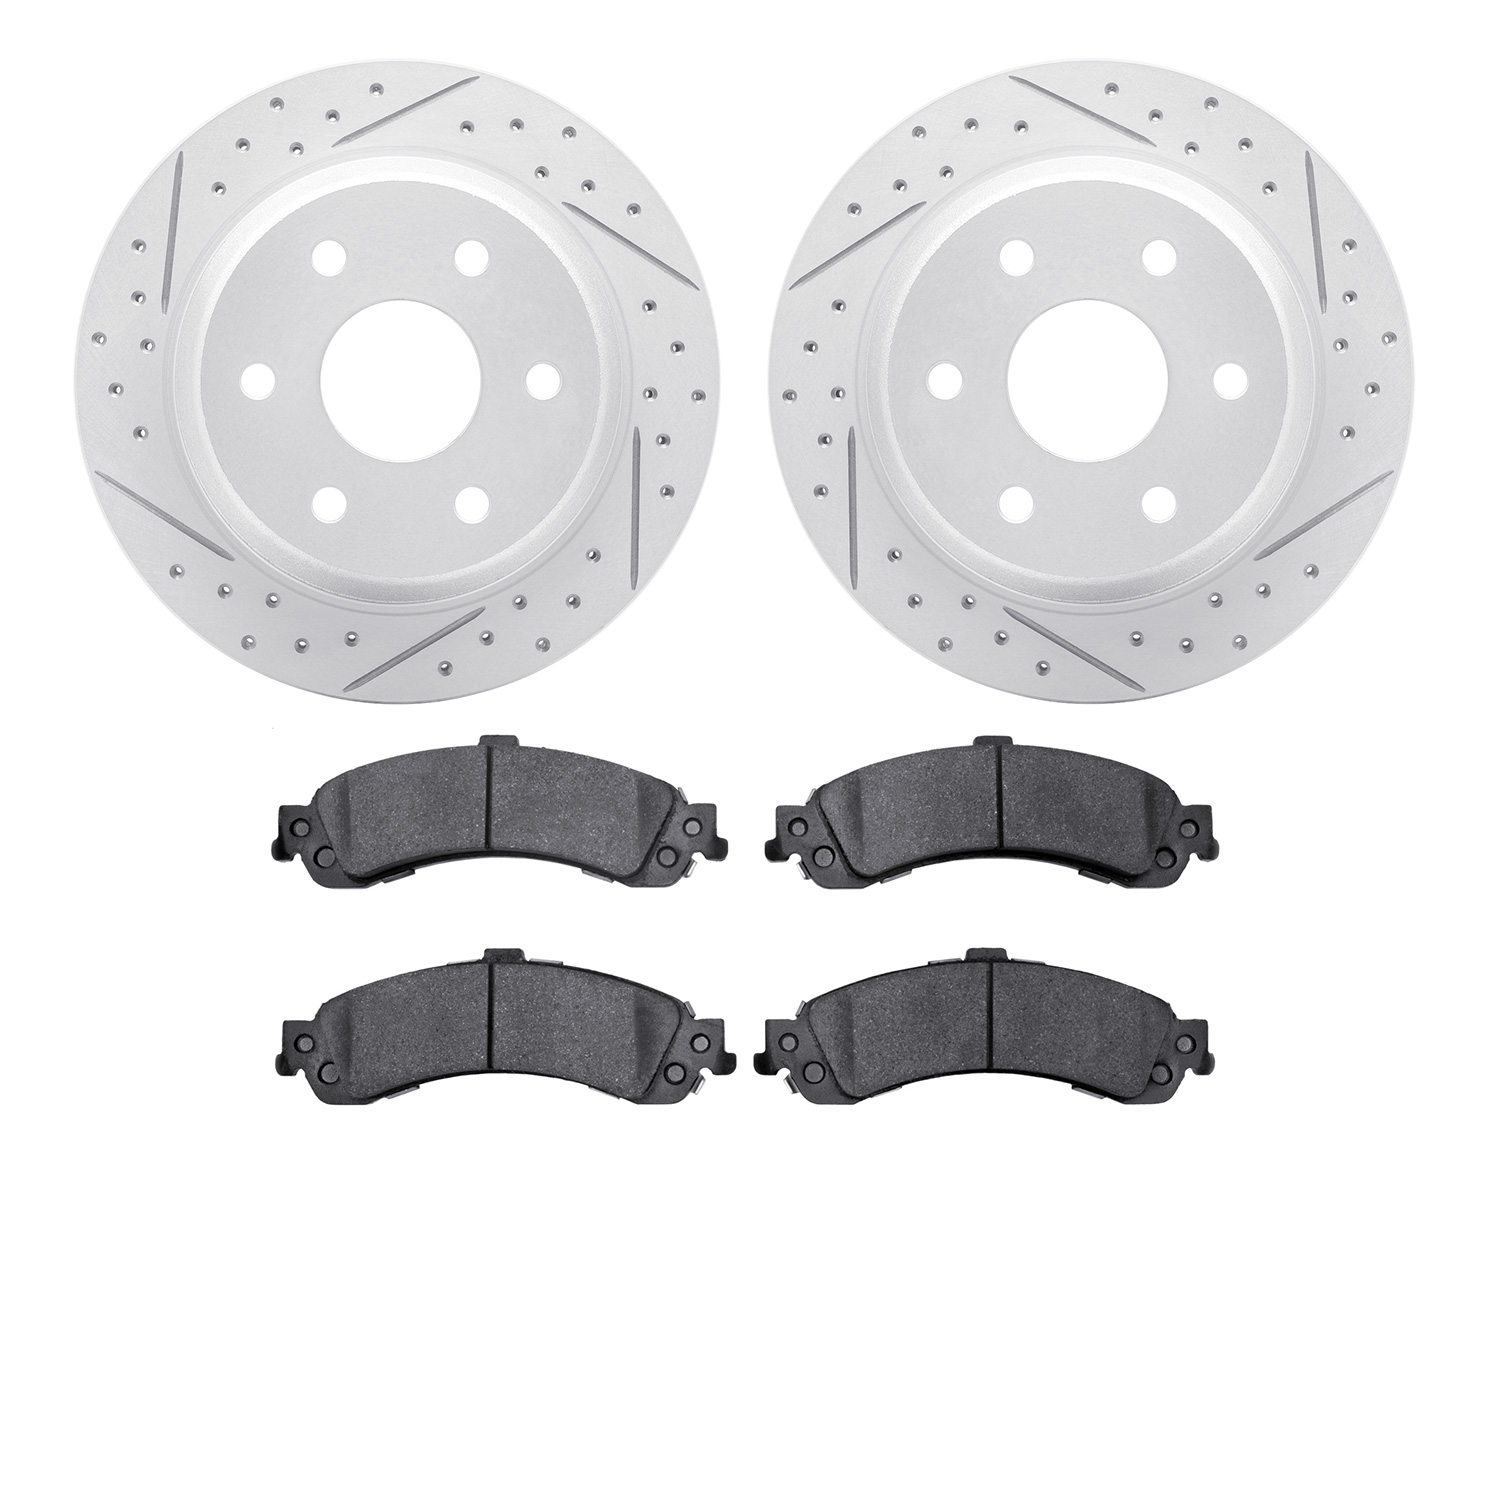 2402-48017 Geoperformance Drilled/Slotted Brake Rotors with Ultimate-Duty Brake Pads Kit, 2000-2006 GM, Position: Rear